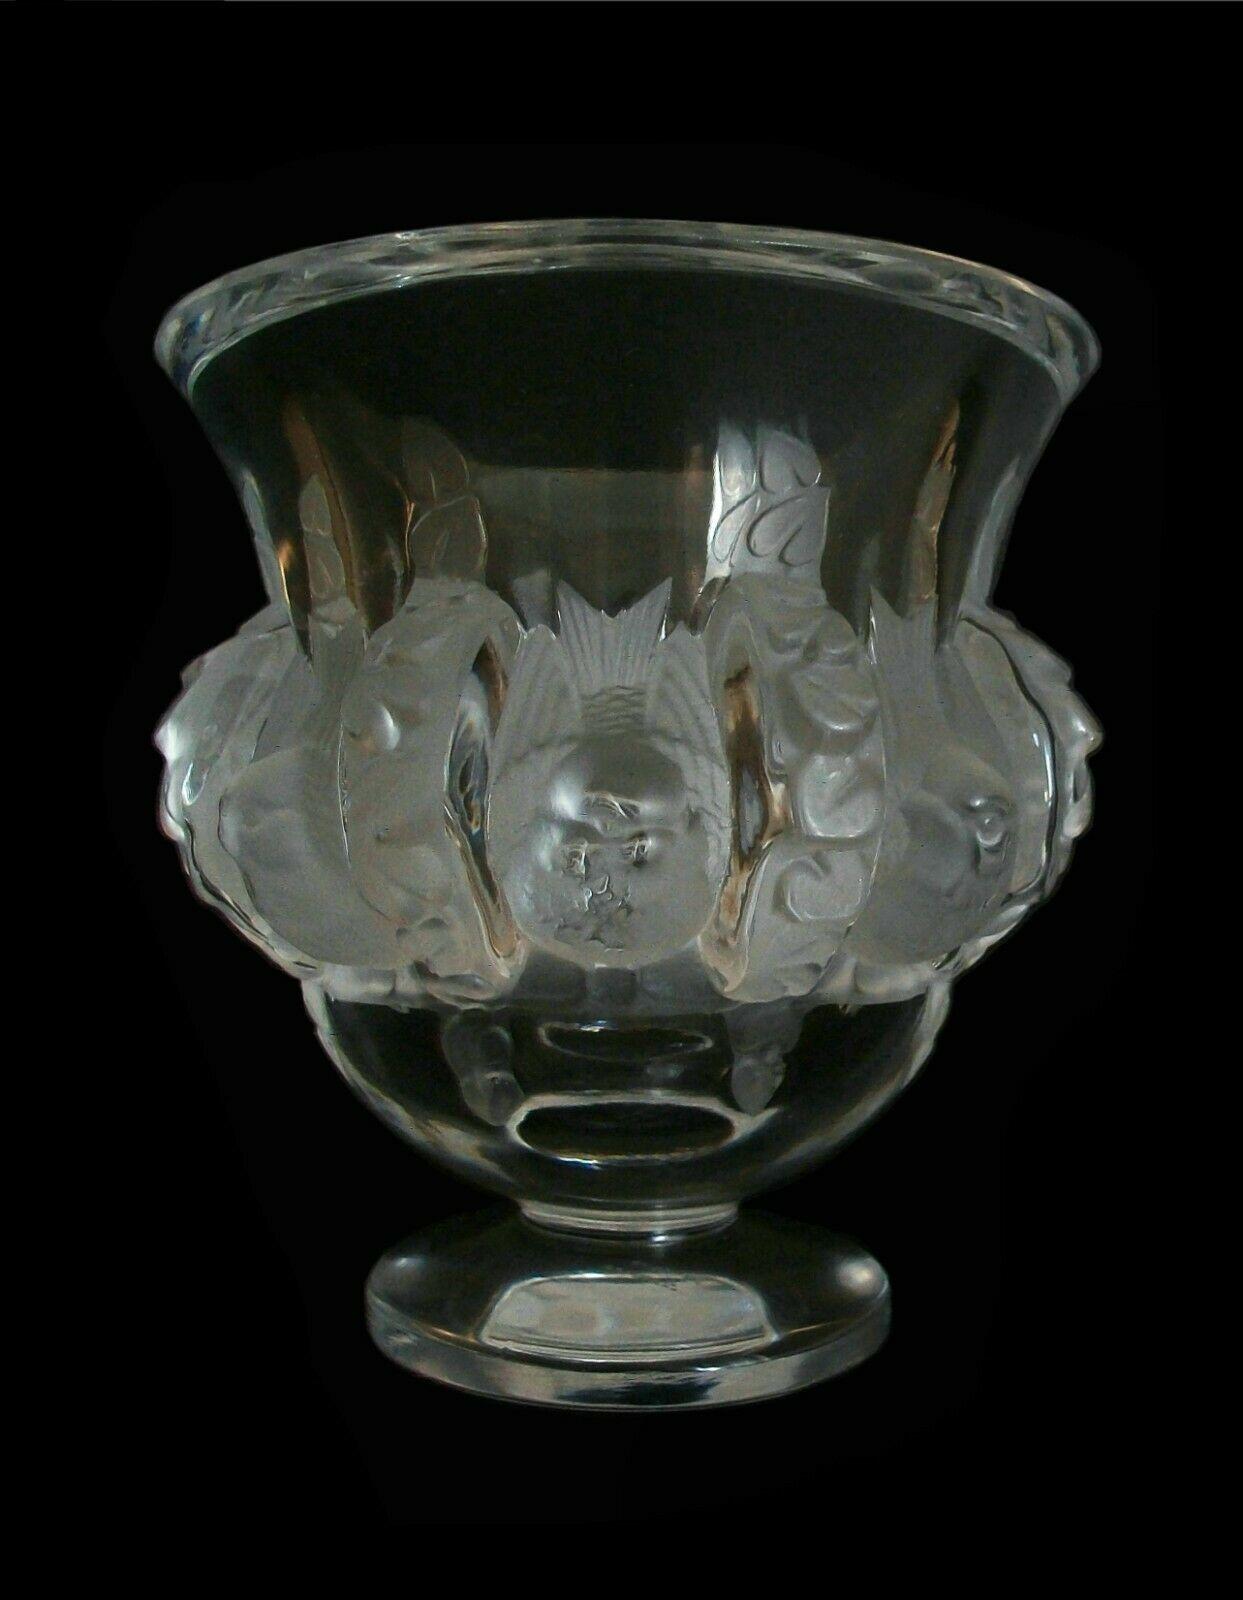 LALIQUE - 'Dampierre' - Vintage Art Deco style luxury crystal vase designed in 1948 by Marc Lalique (son of Rene Lalique) - striking frosted finish to the central band featuring birds and leaves - contrasting clear polished finish to the bowl, rim